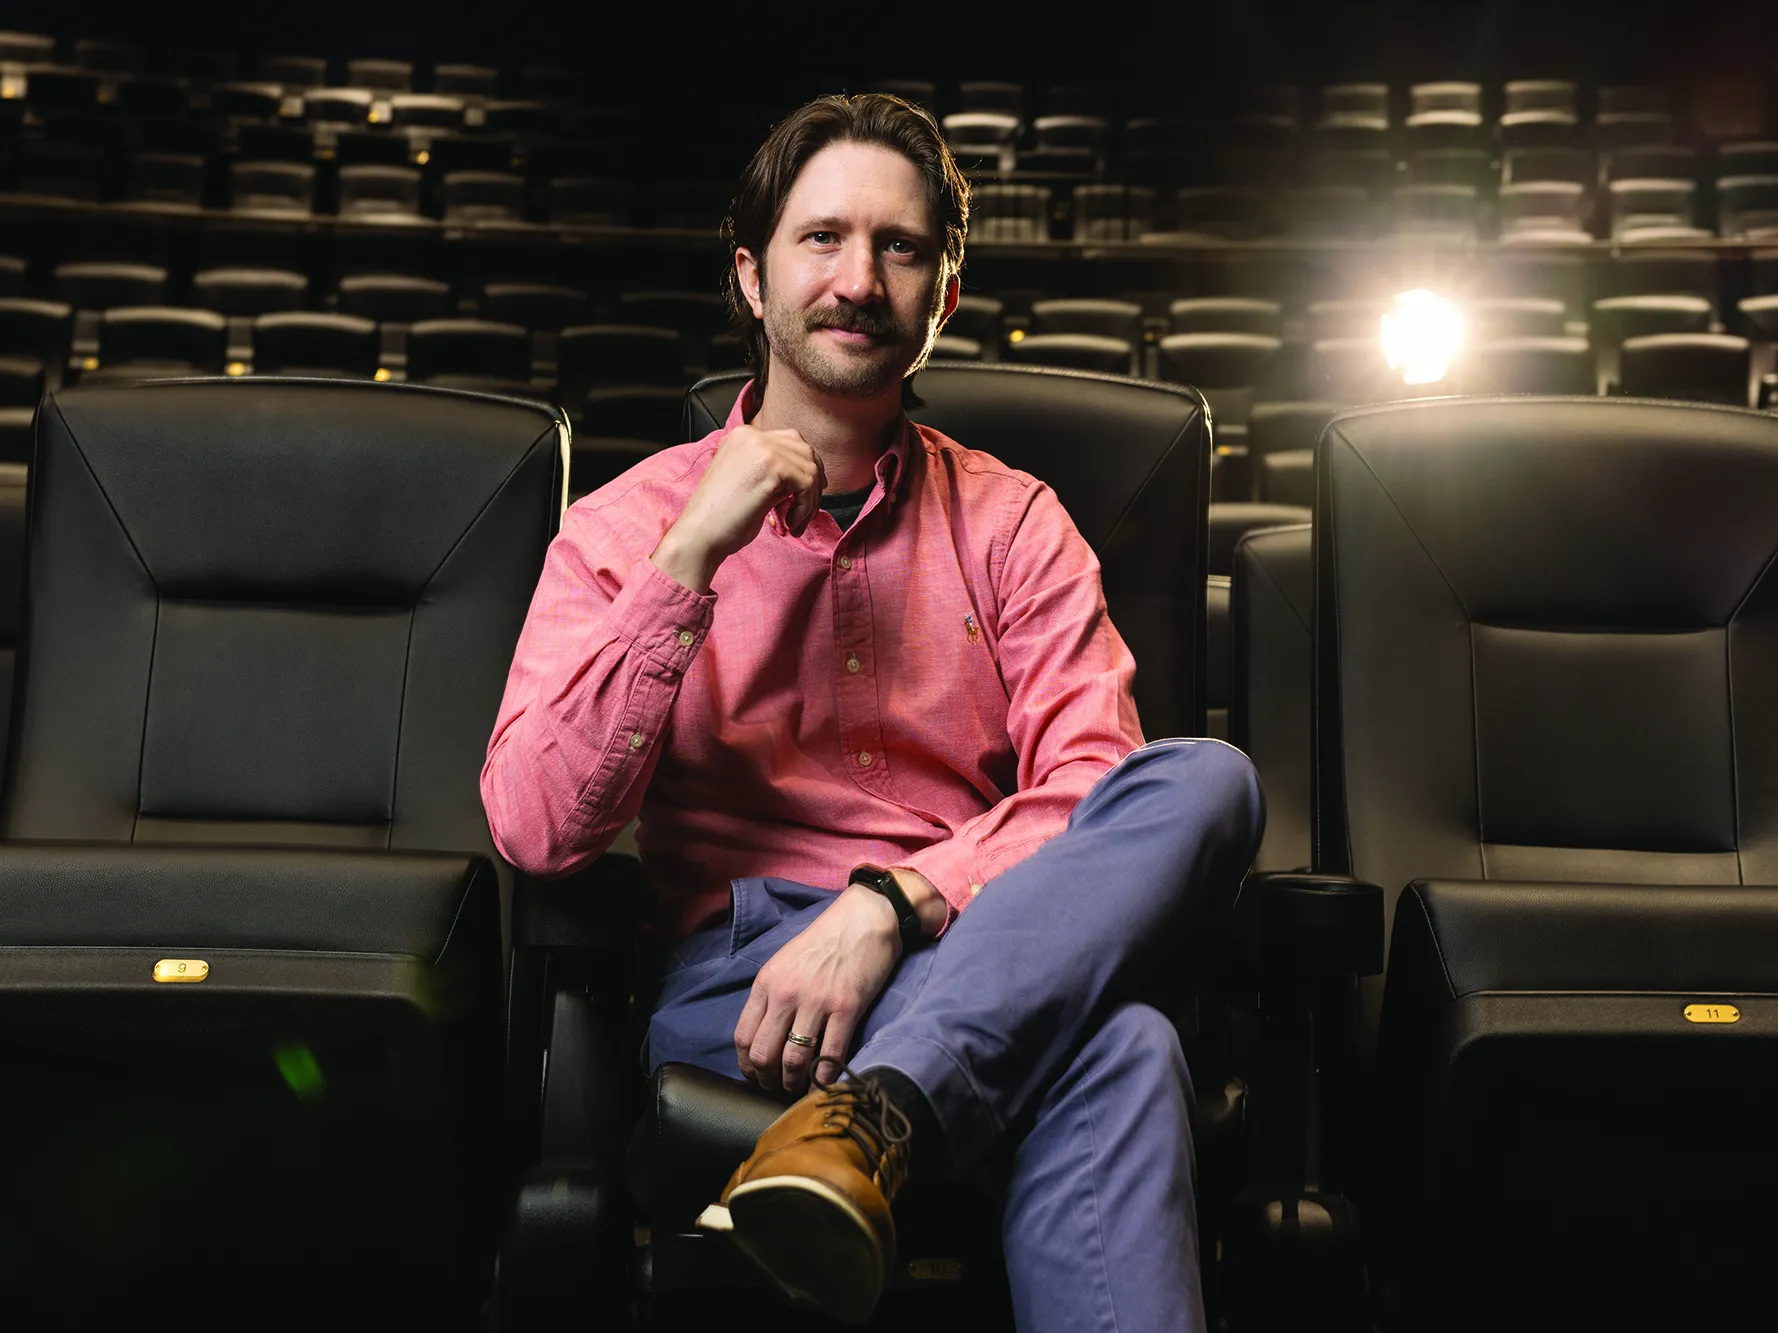 Sitting in a theater with leather seats, Matthew Grizzard, a bearded white man wearing khakis and a button down, sits relaxed with one leg crossed over the other and his hands seeming as if he’s focusing as he listens. He’s smiling with his eyes more than his mouth.